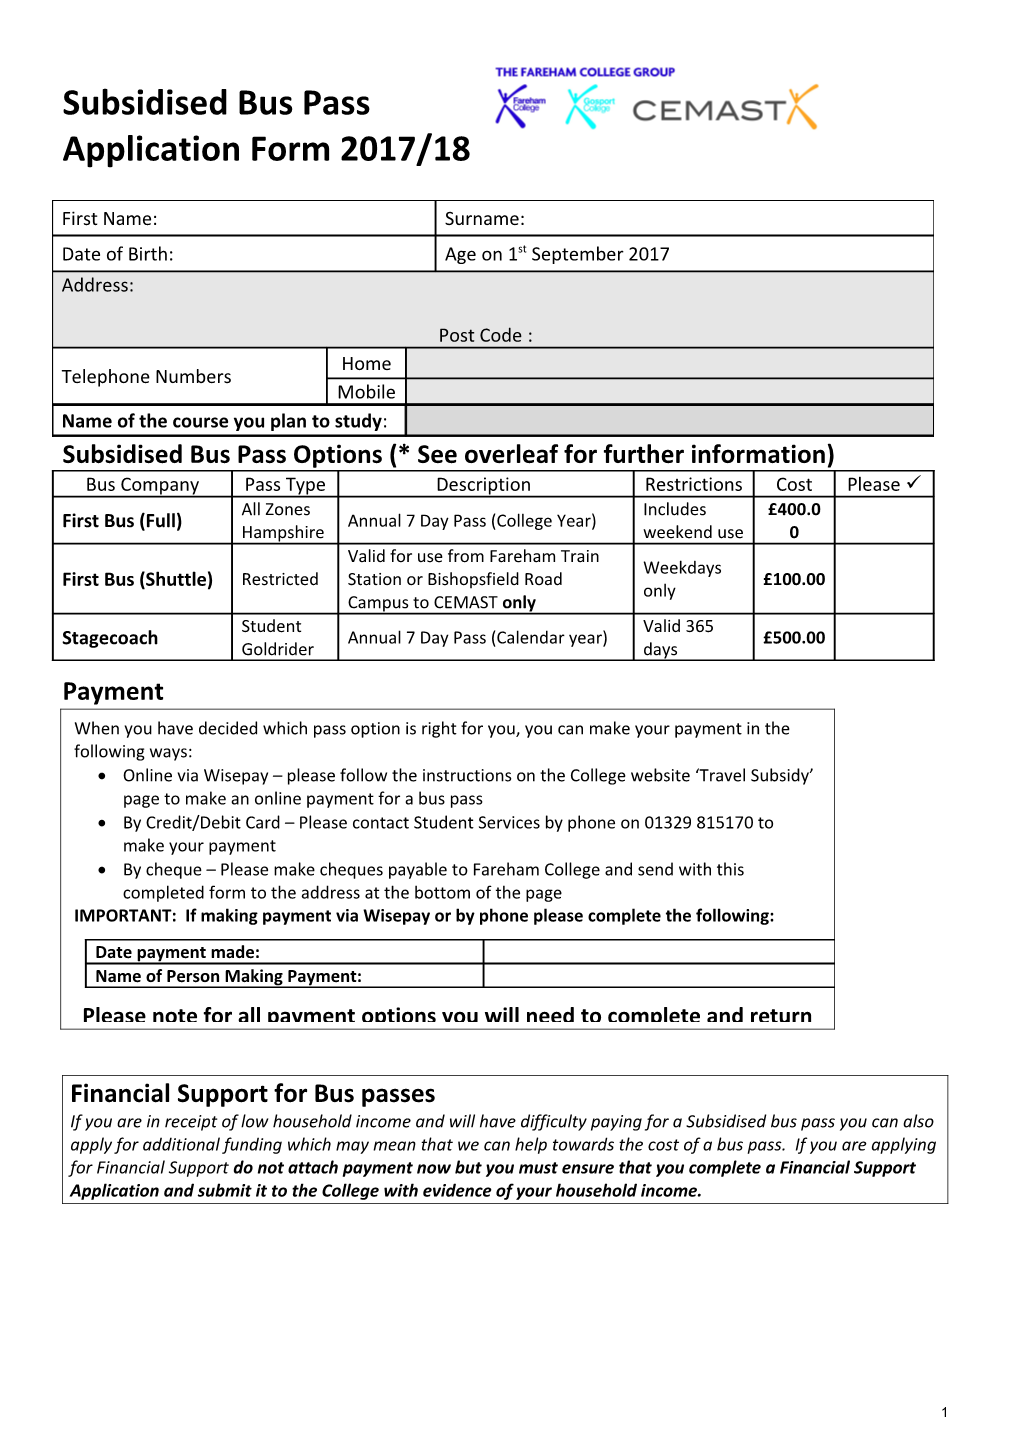 Bus Pass/Rail Subsidy Application Form for Full Time Students